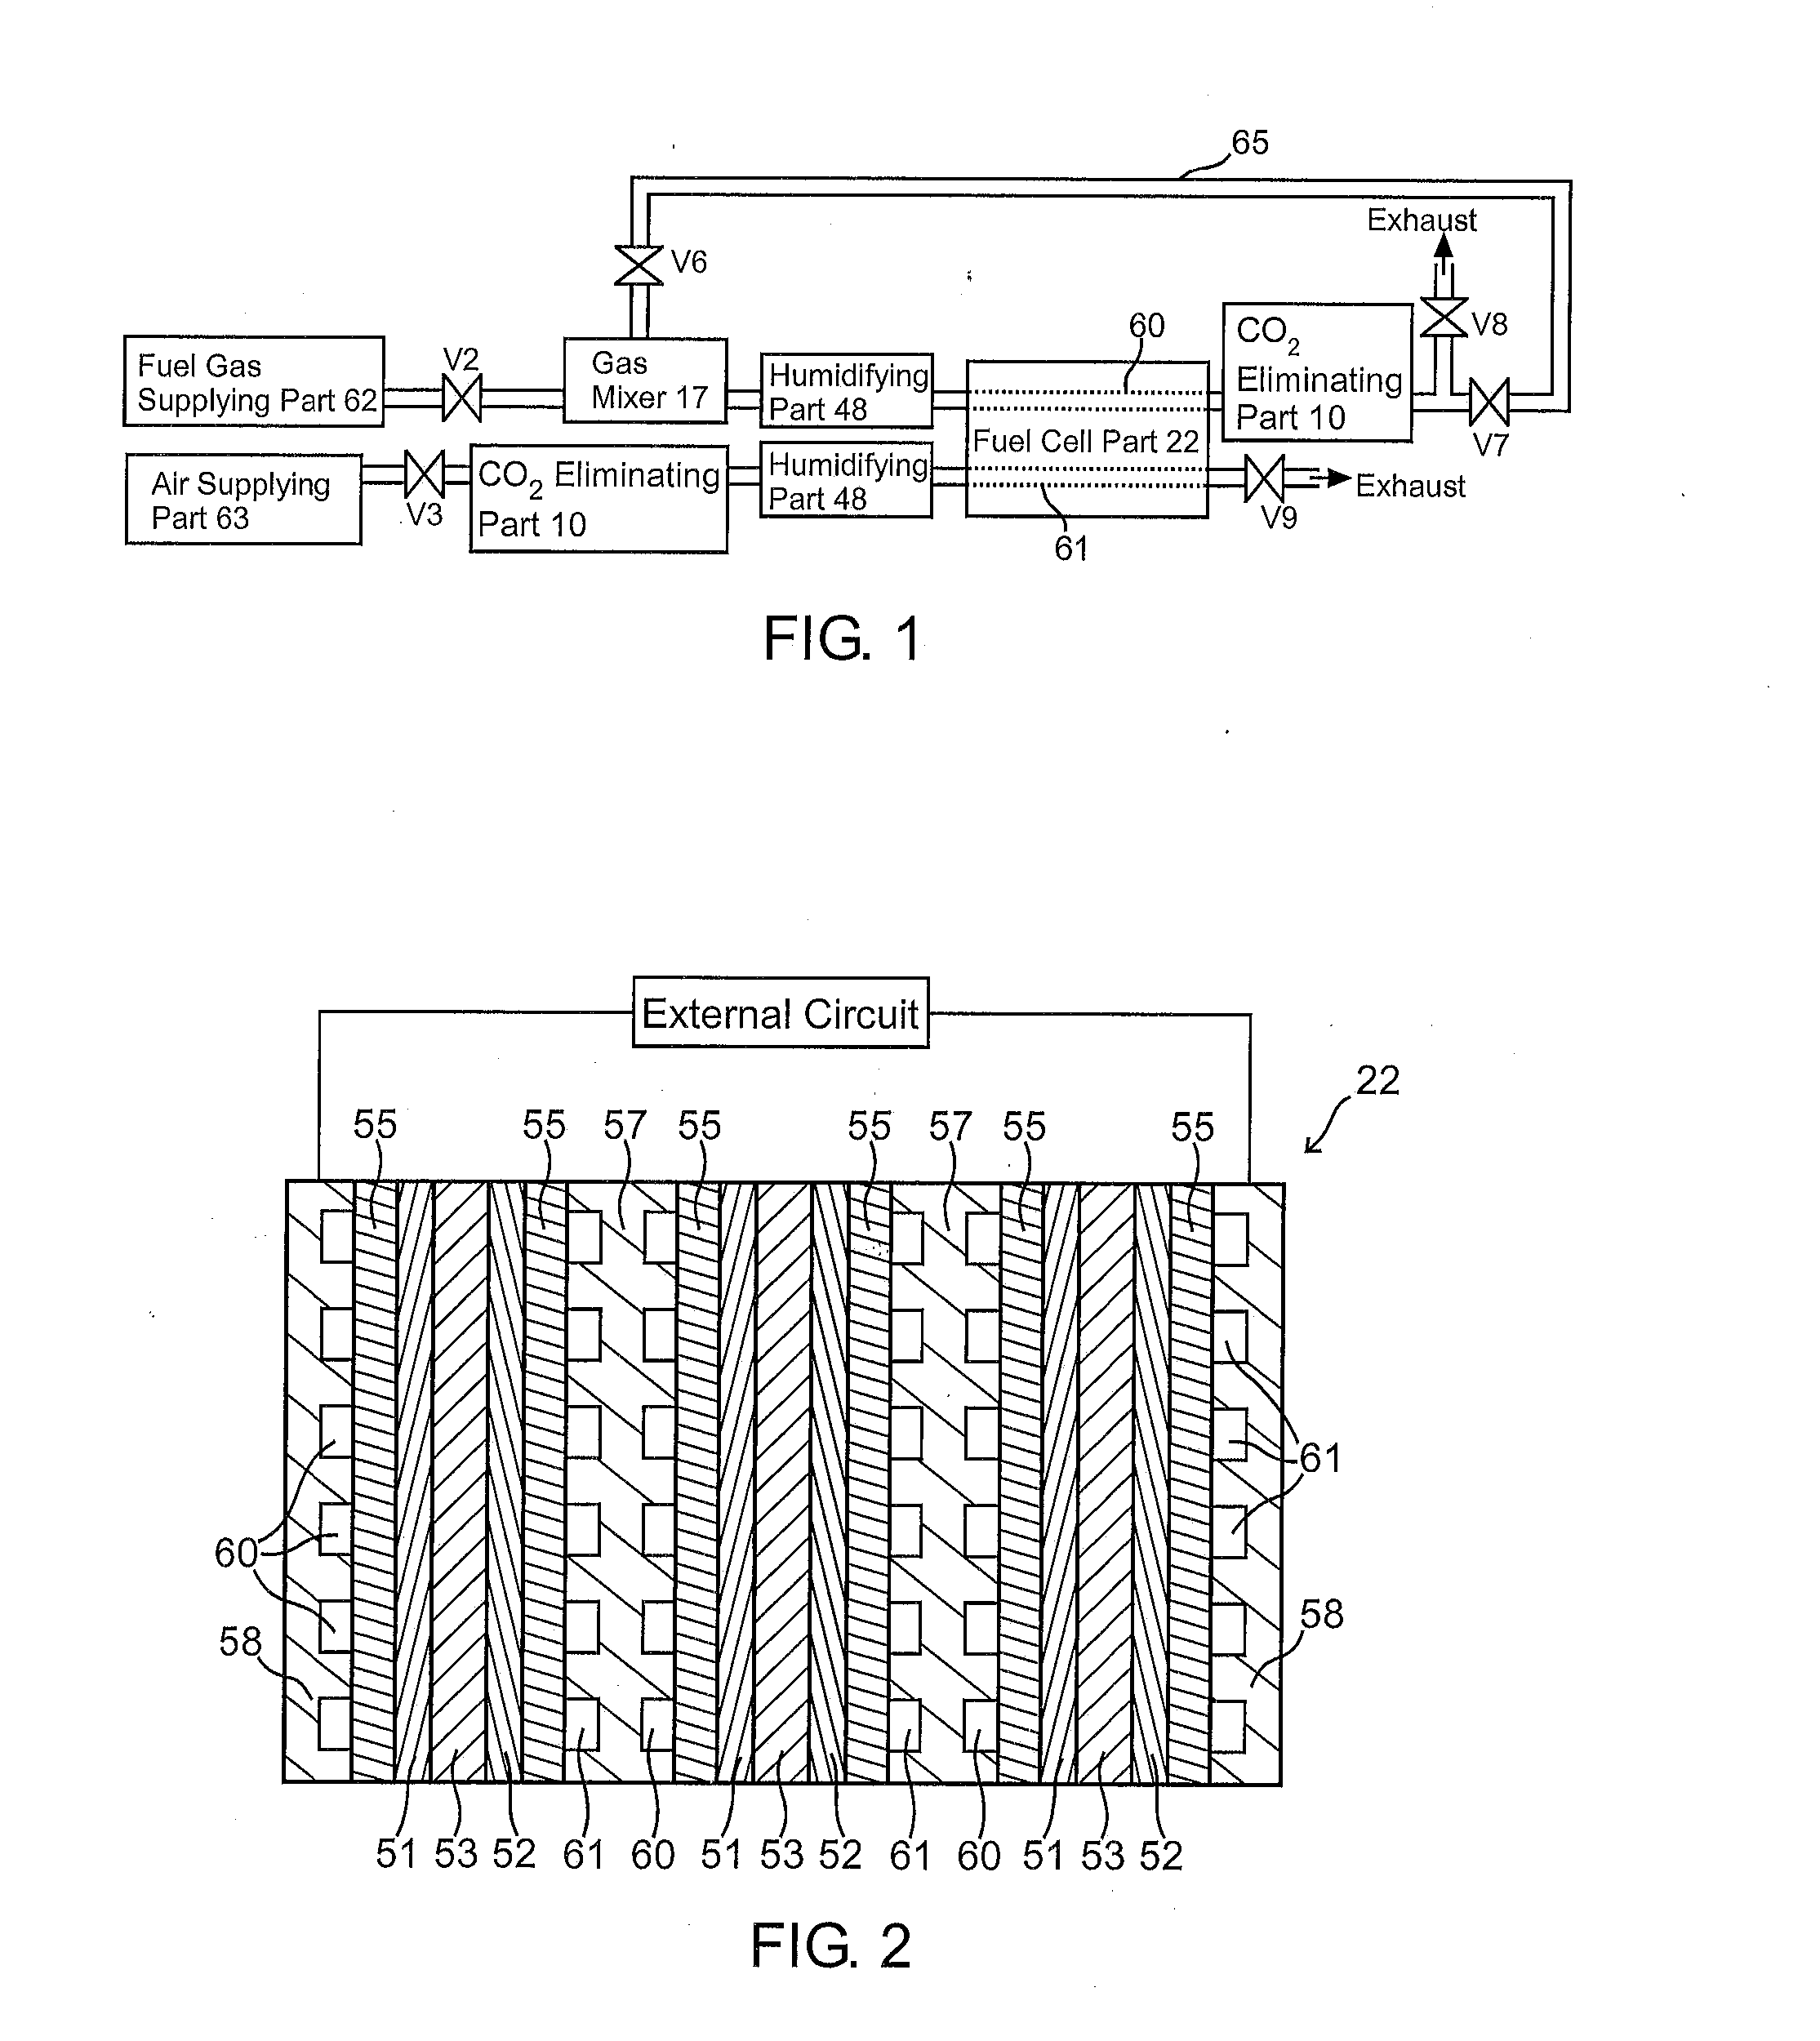 Anion-exchange-membrane type of fuel-cell-system